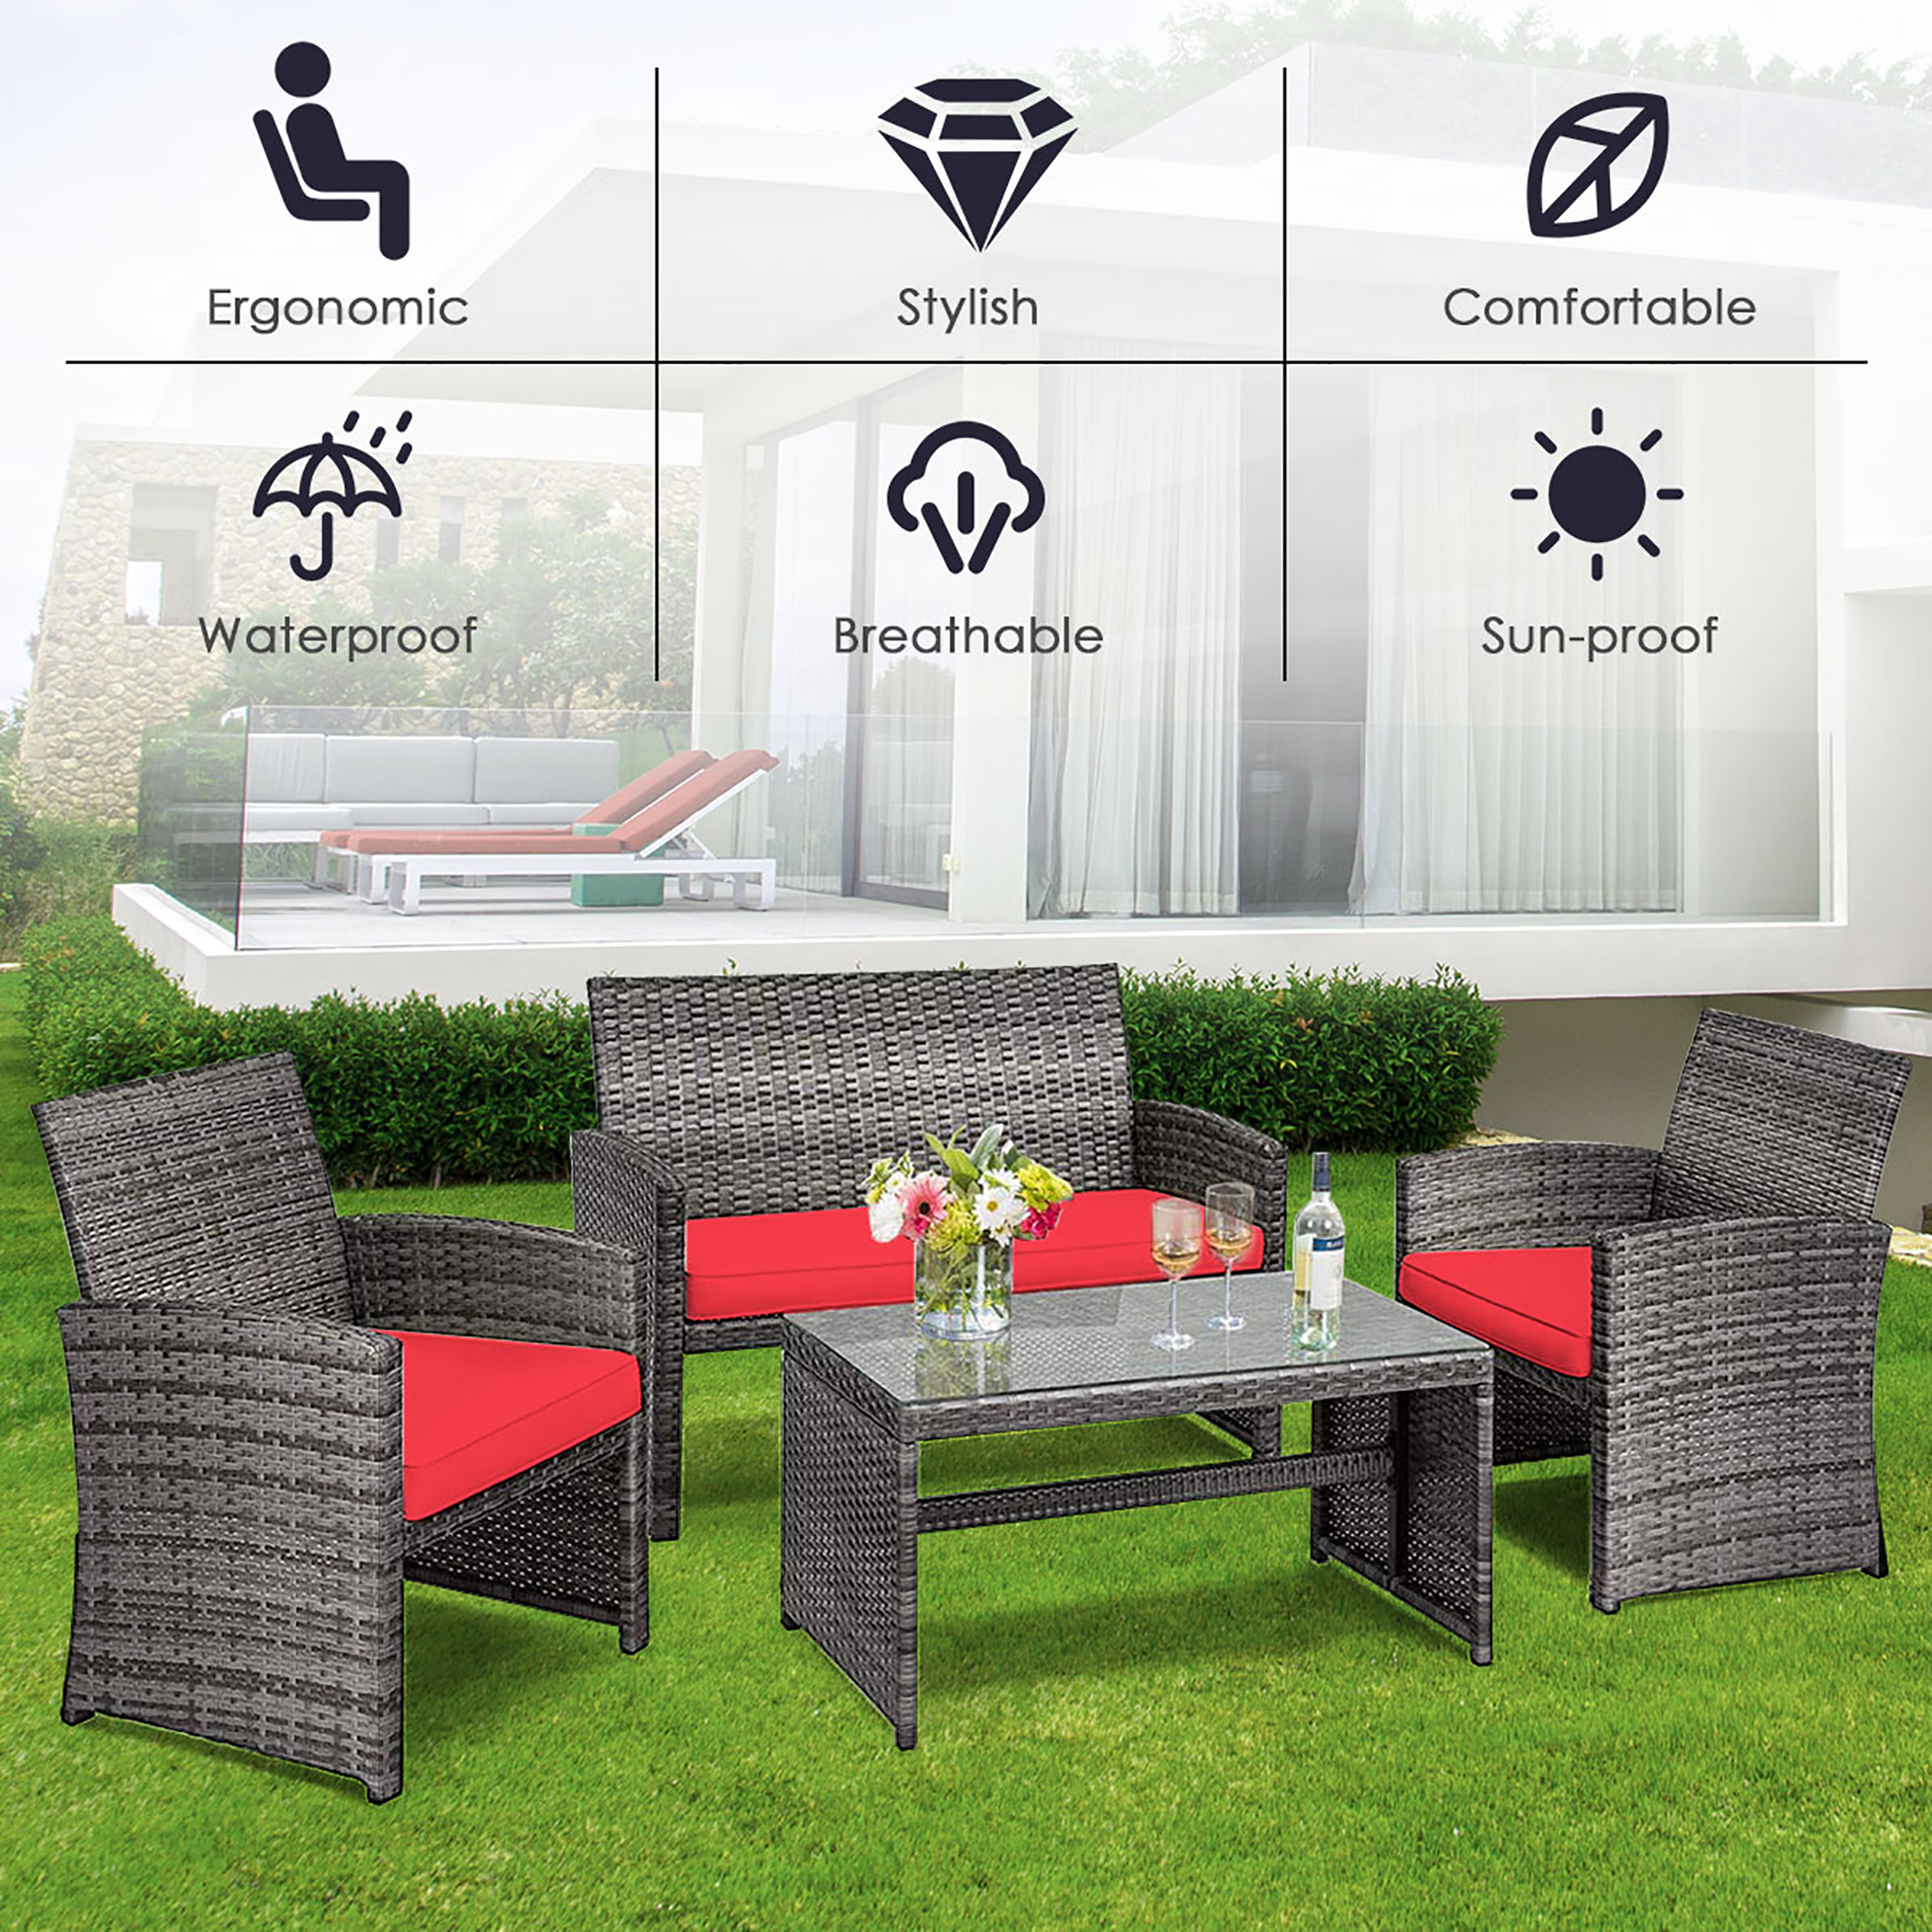 Costway 4PCS Patio Rattan Conversation Glass Table Top Cushioned Sofa Red - image 9 of 10